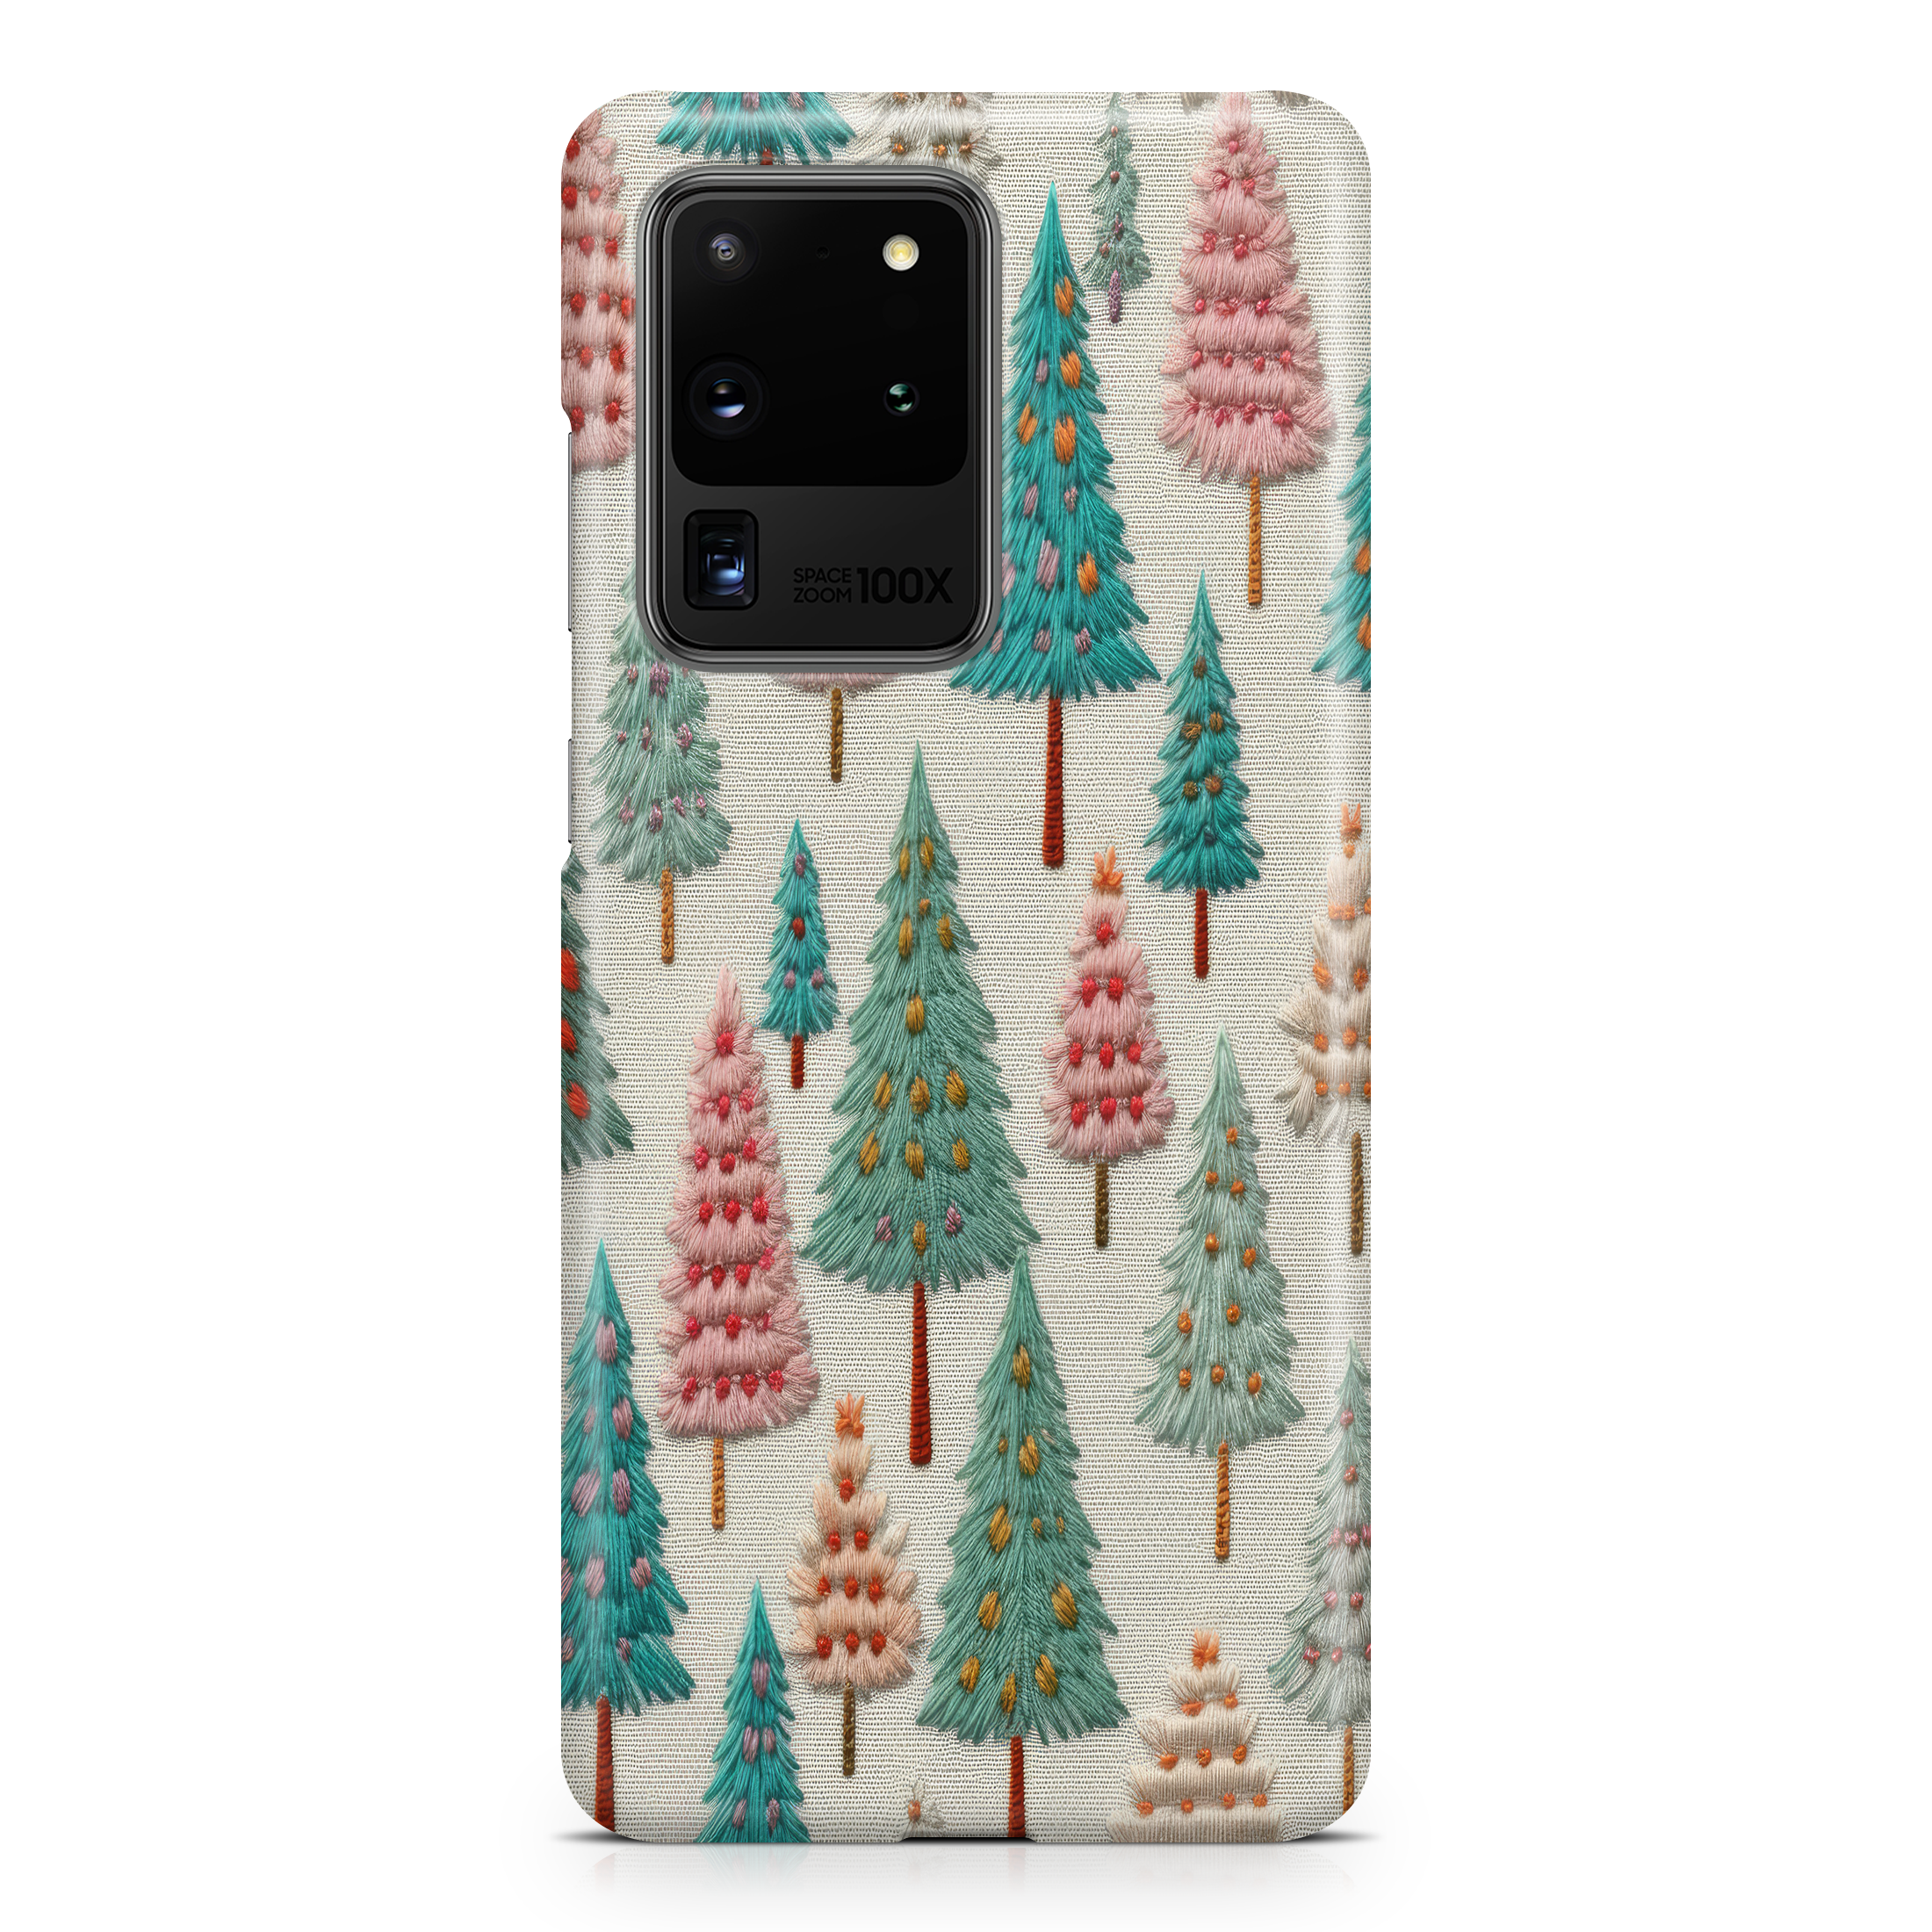 Christmas Trees - Samsung phone case designs by CaseSwagger